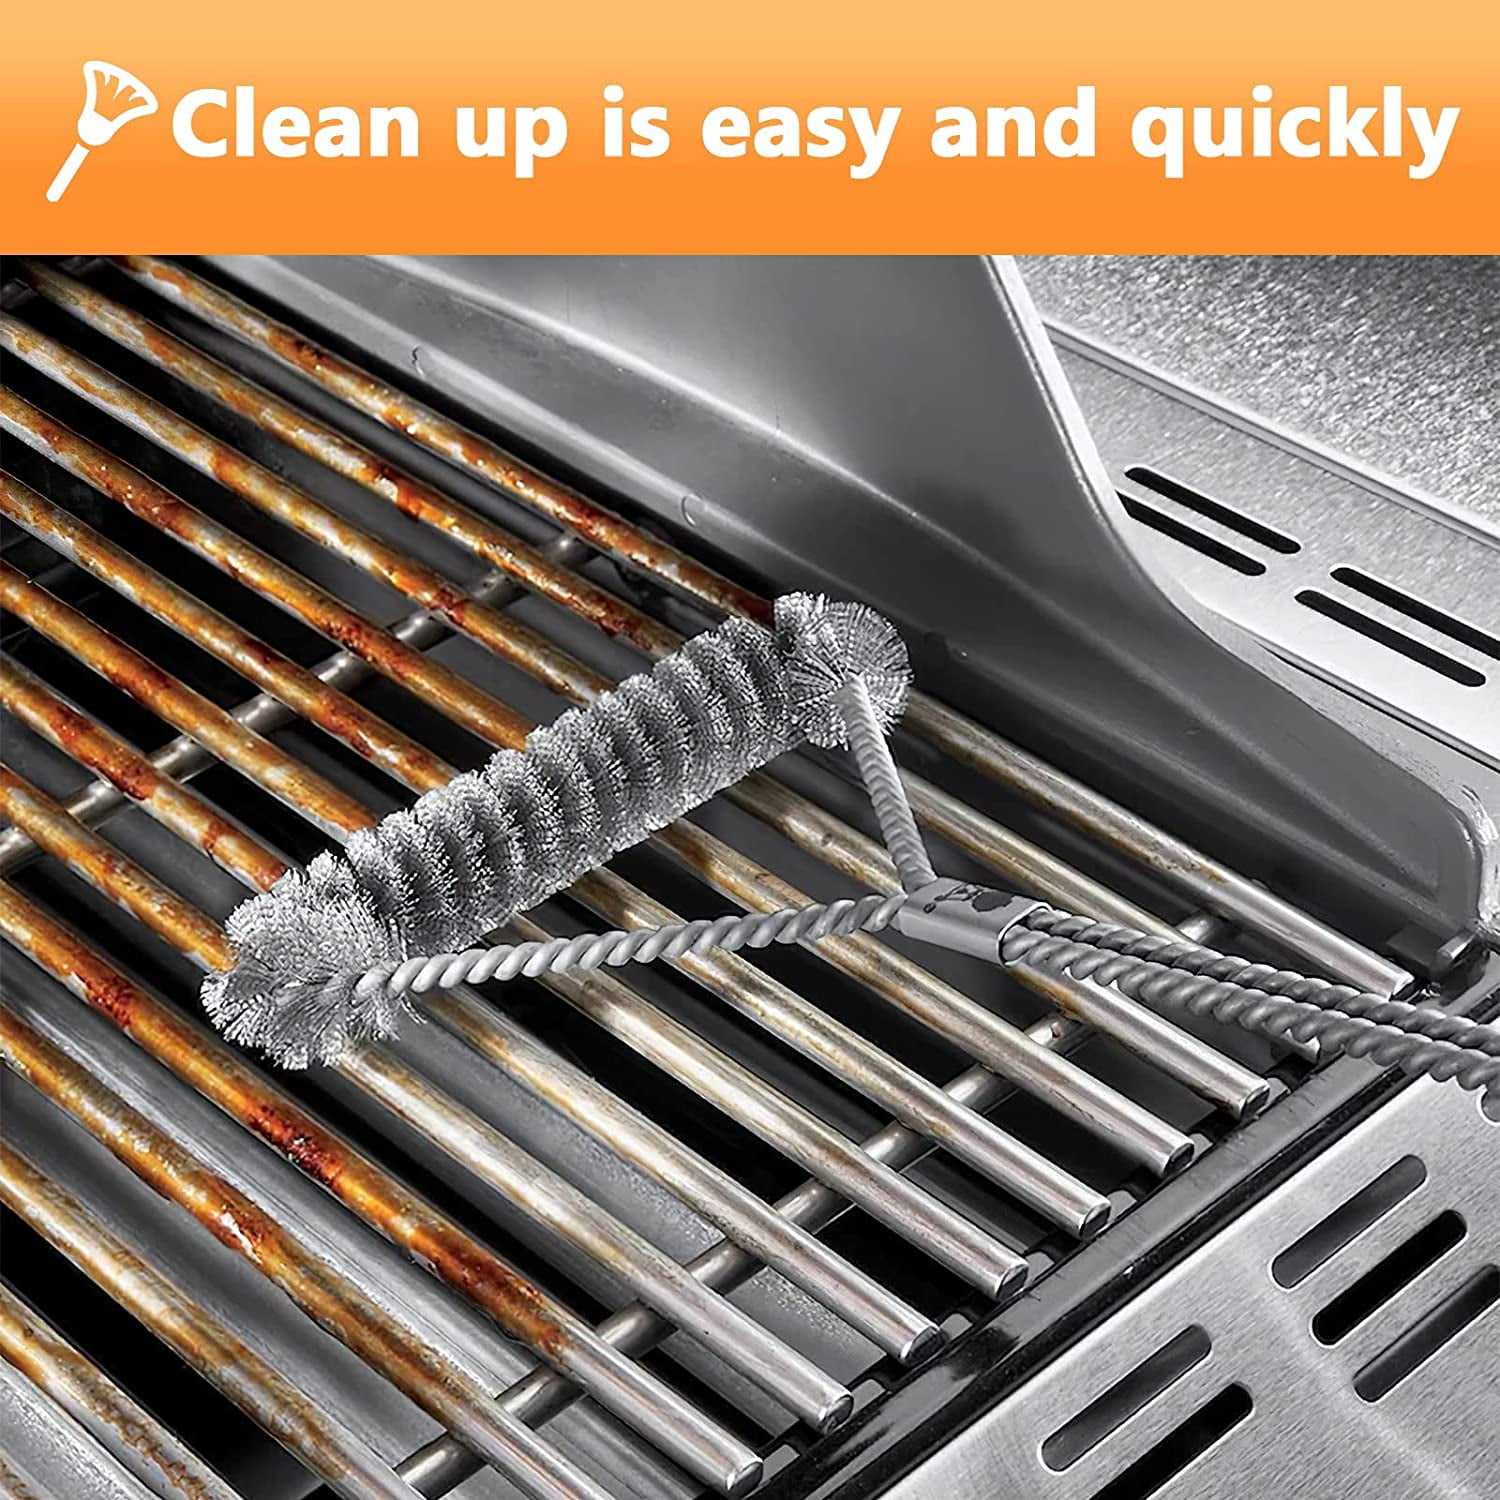 Safely Steam Cleaning Your Grill Grate – KitchenReady